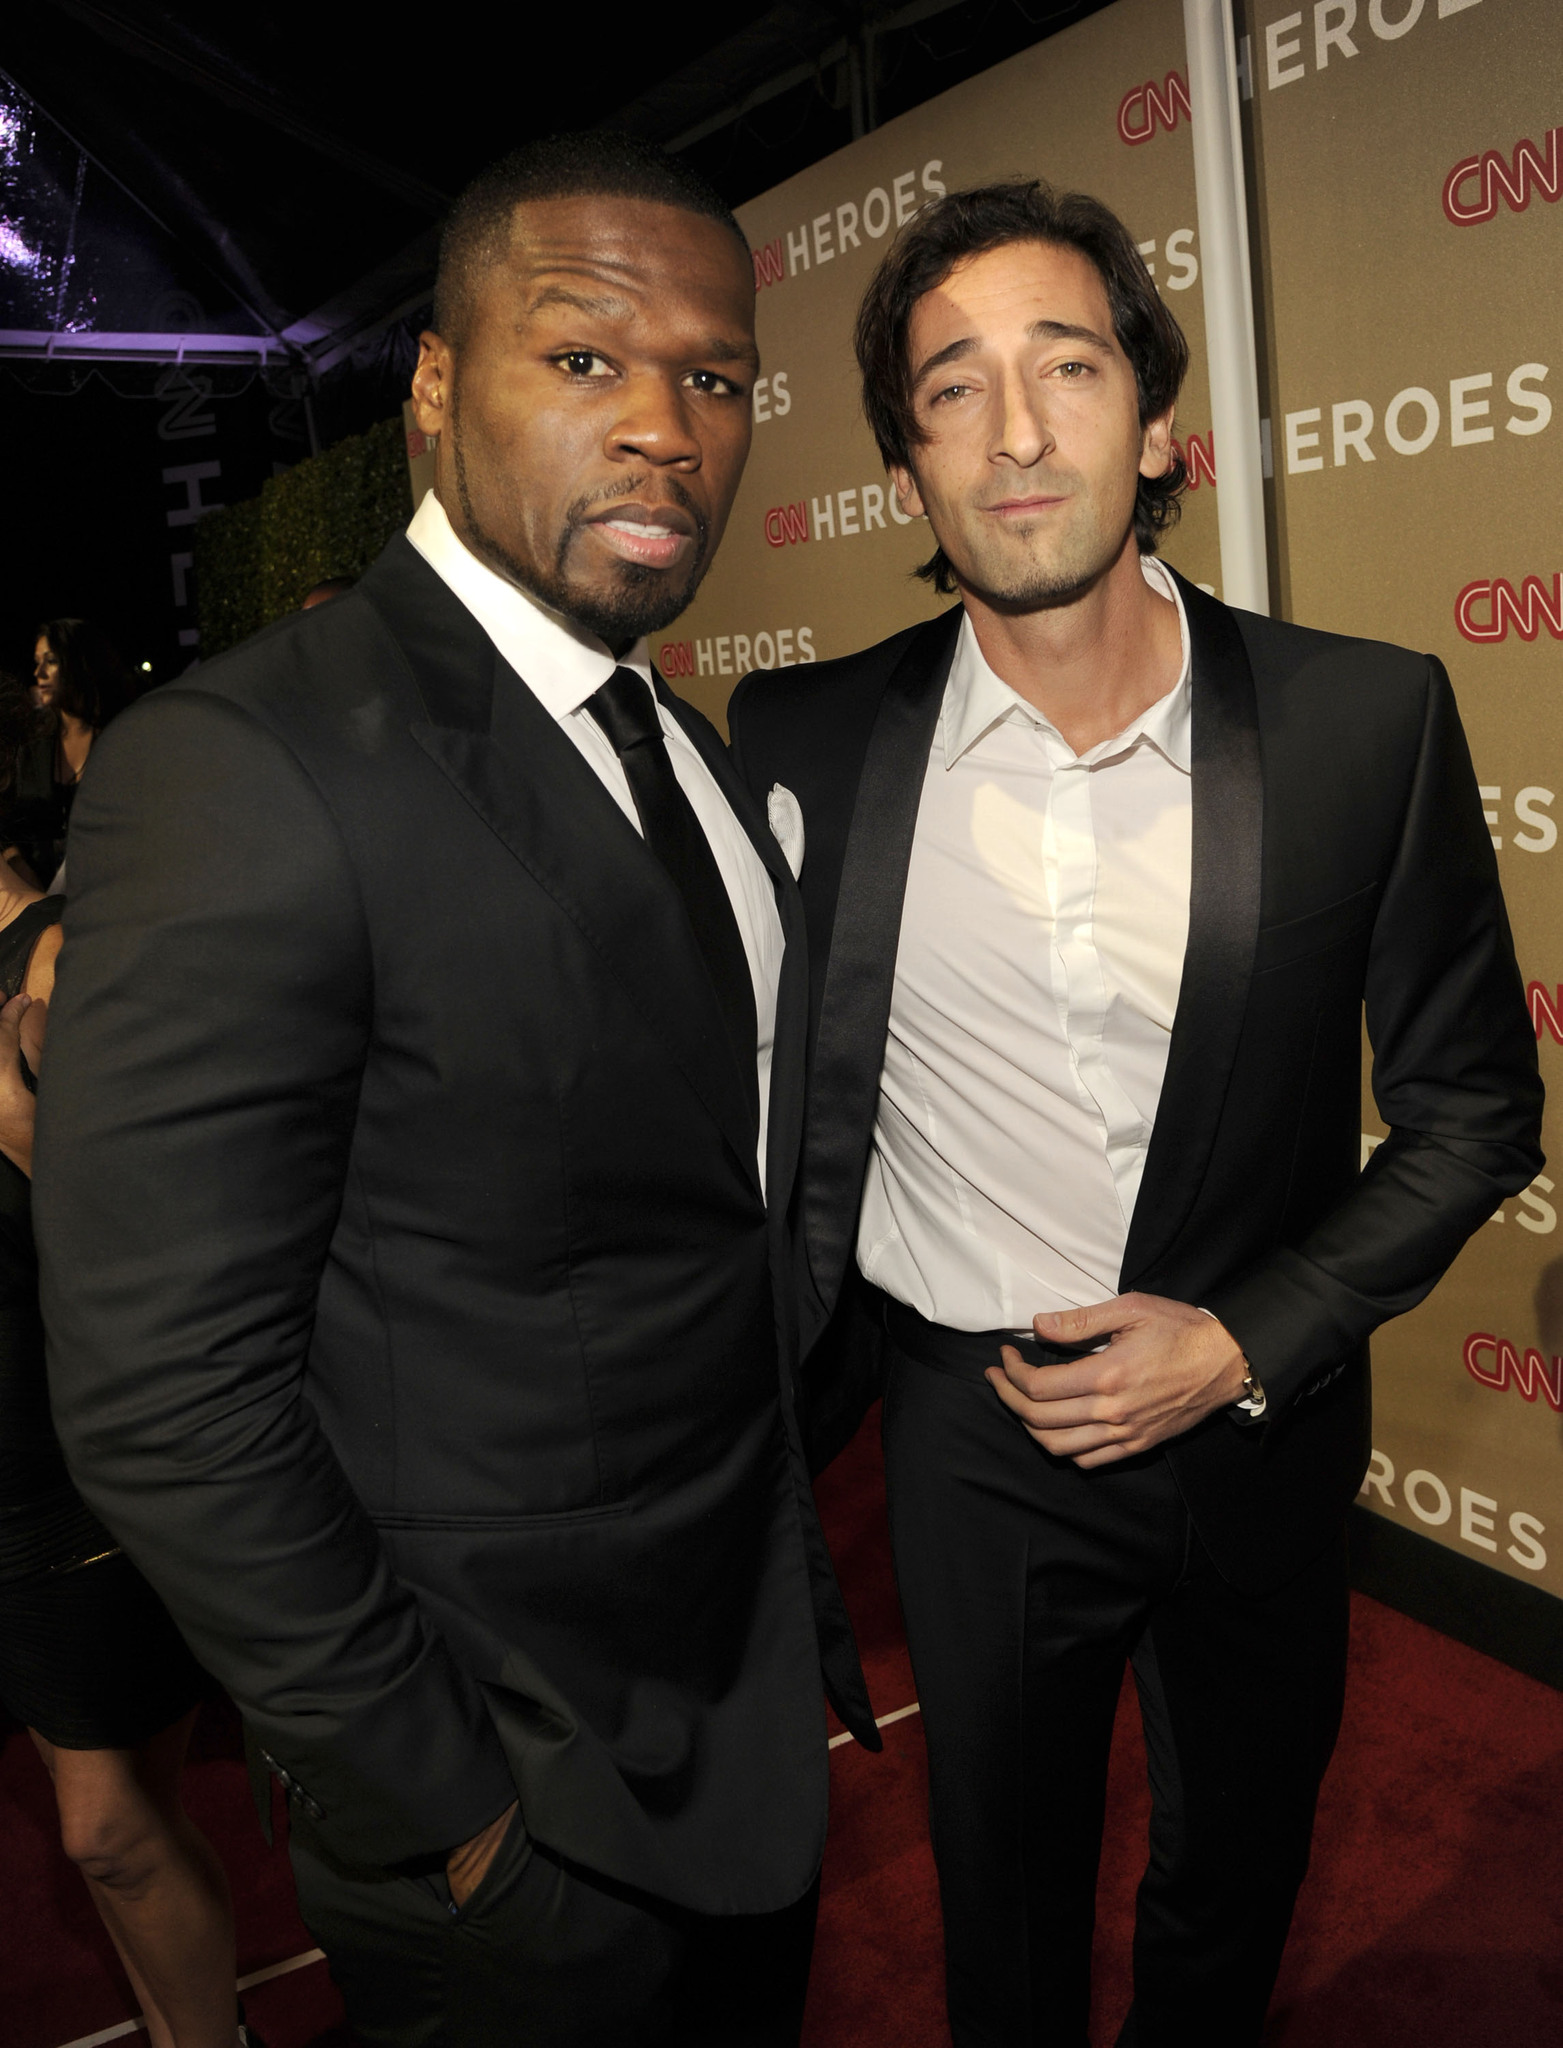 Adrien Brody and 50 Cent